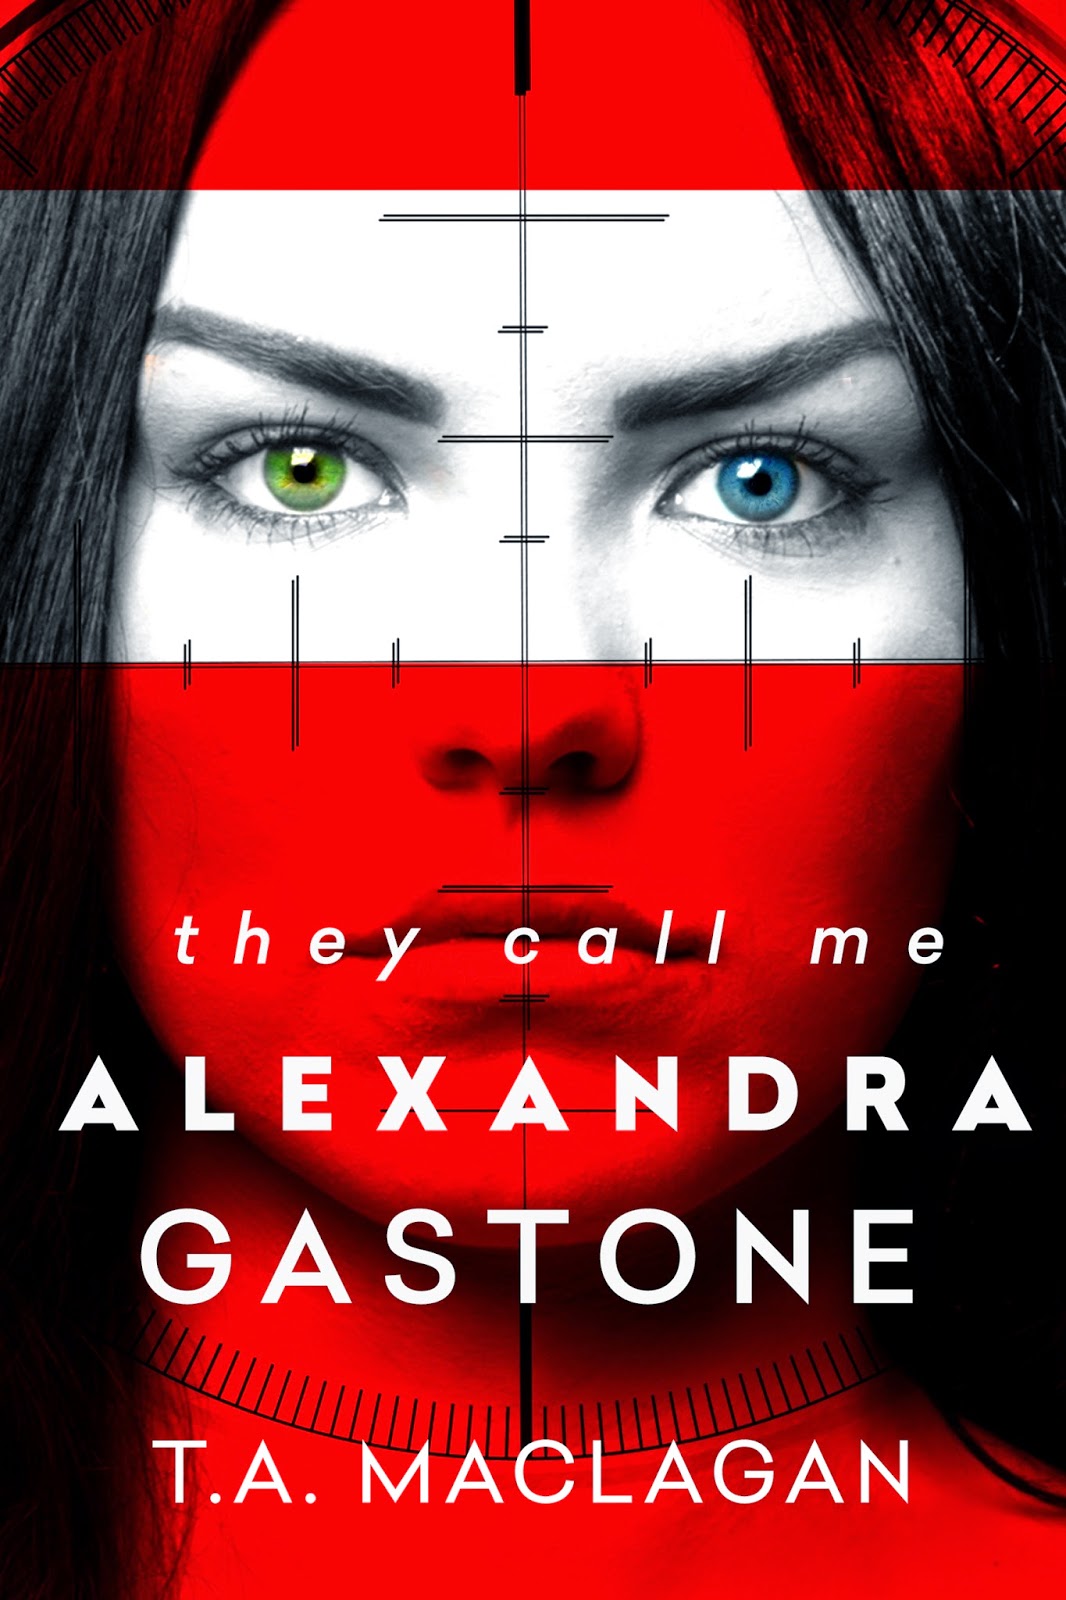 Guest Post: T.A. Maclagan on Spy Novel Covers & They Call Me Alexandra Gastone